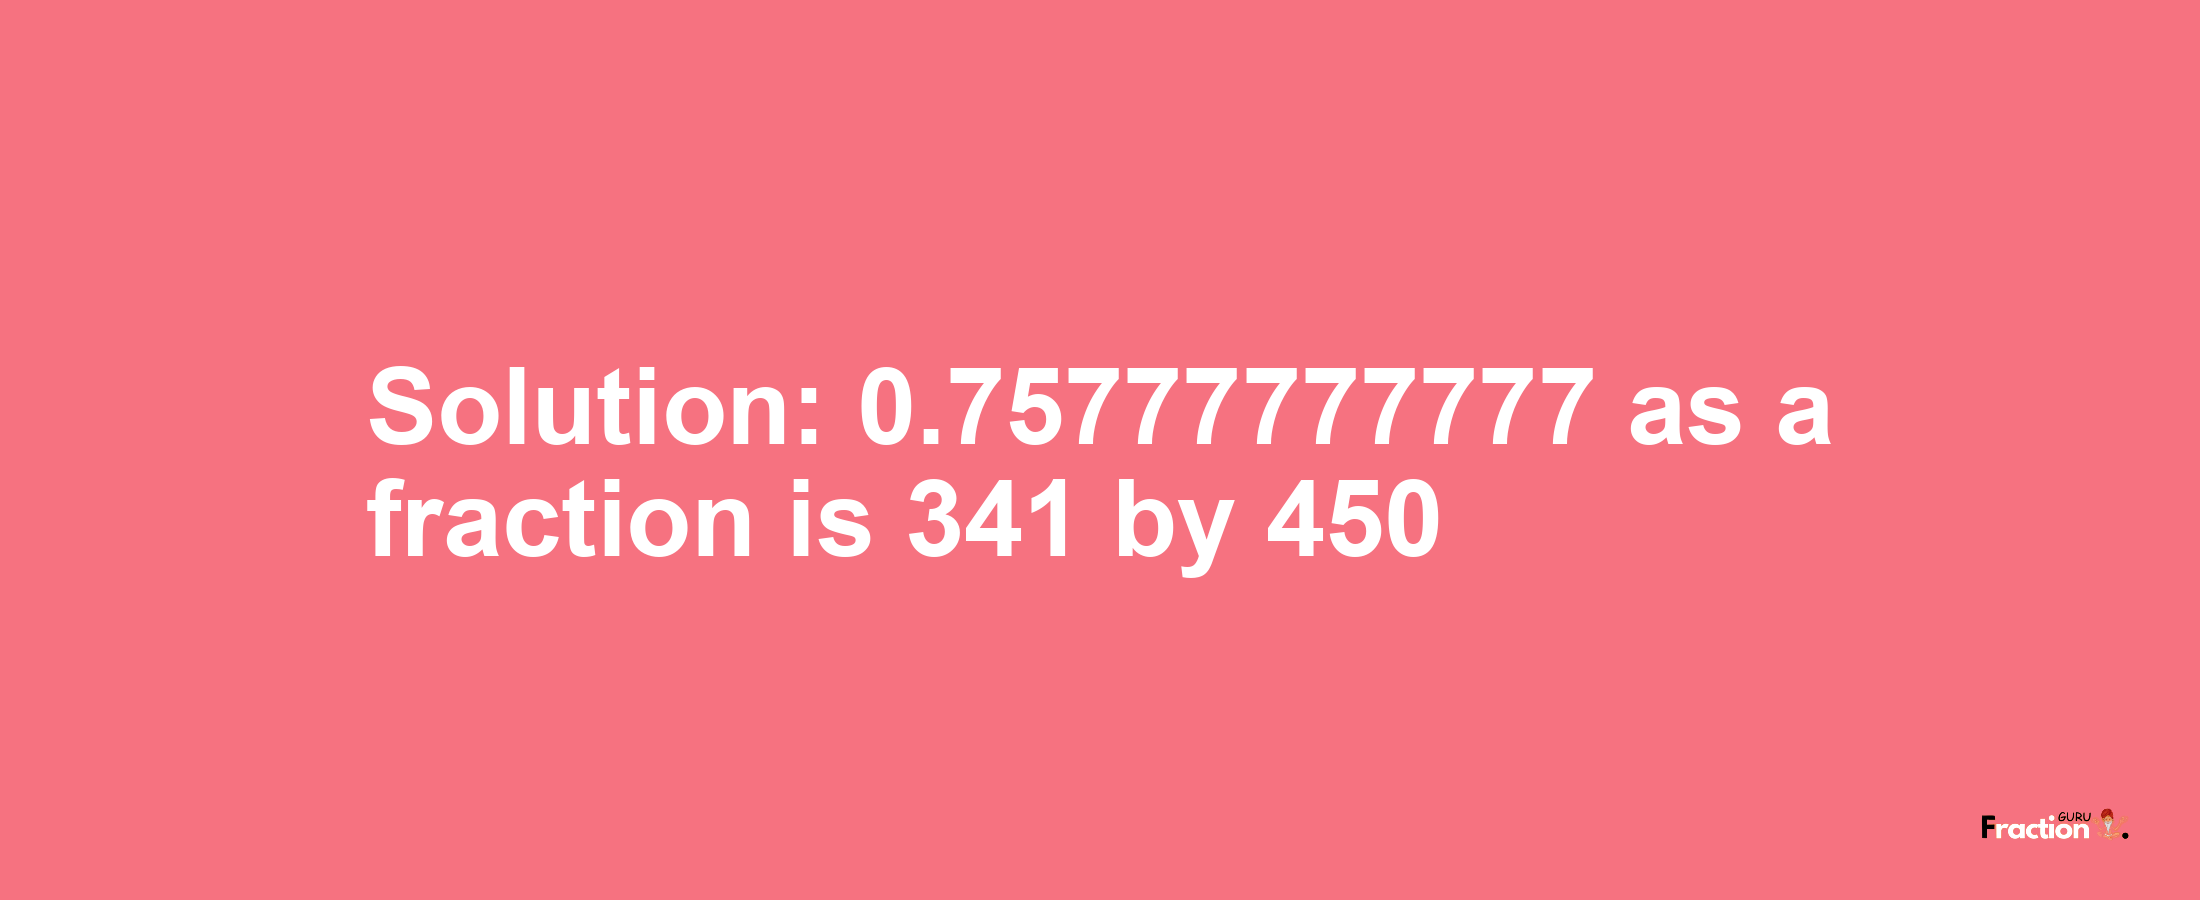 Solution:0.75777777777 as a fraction is 341/450